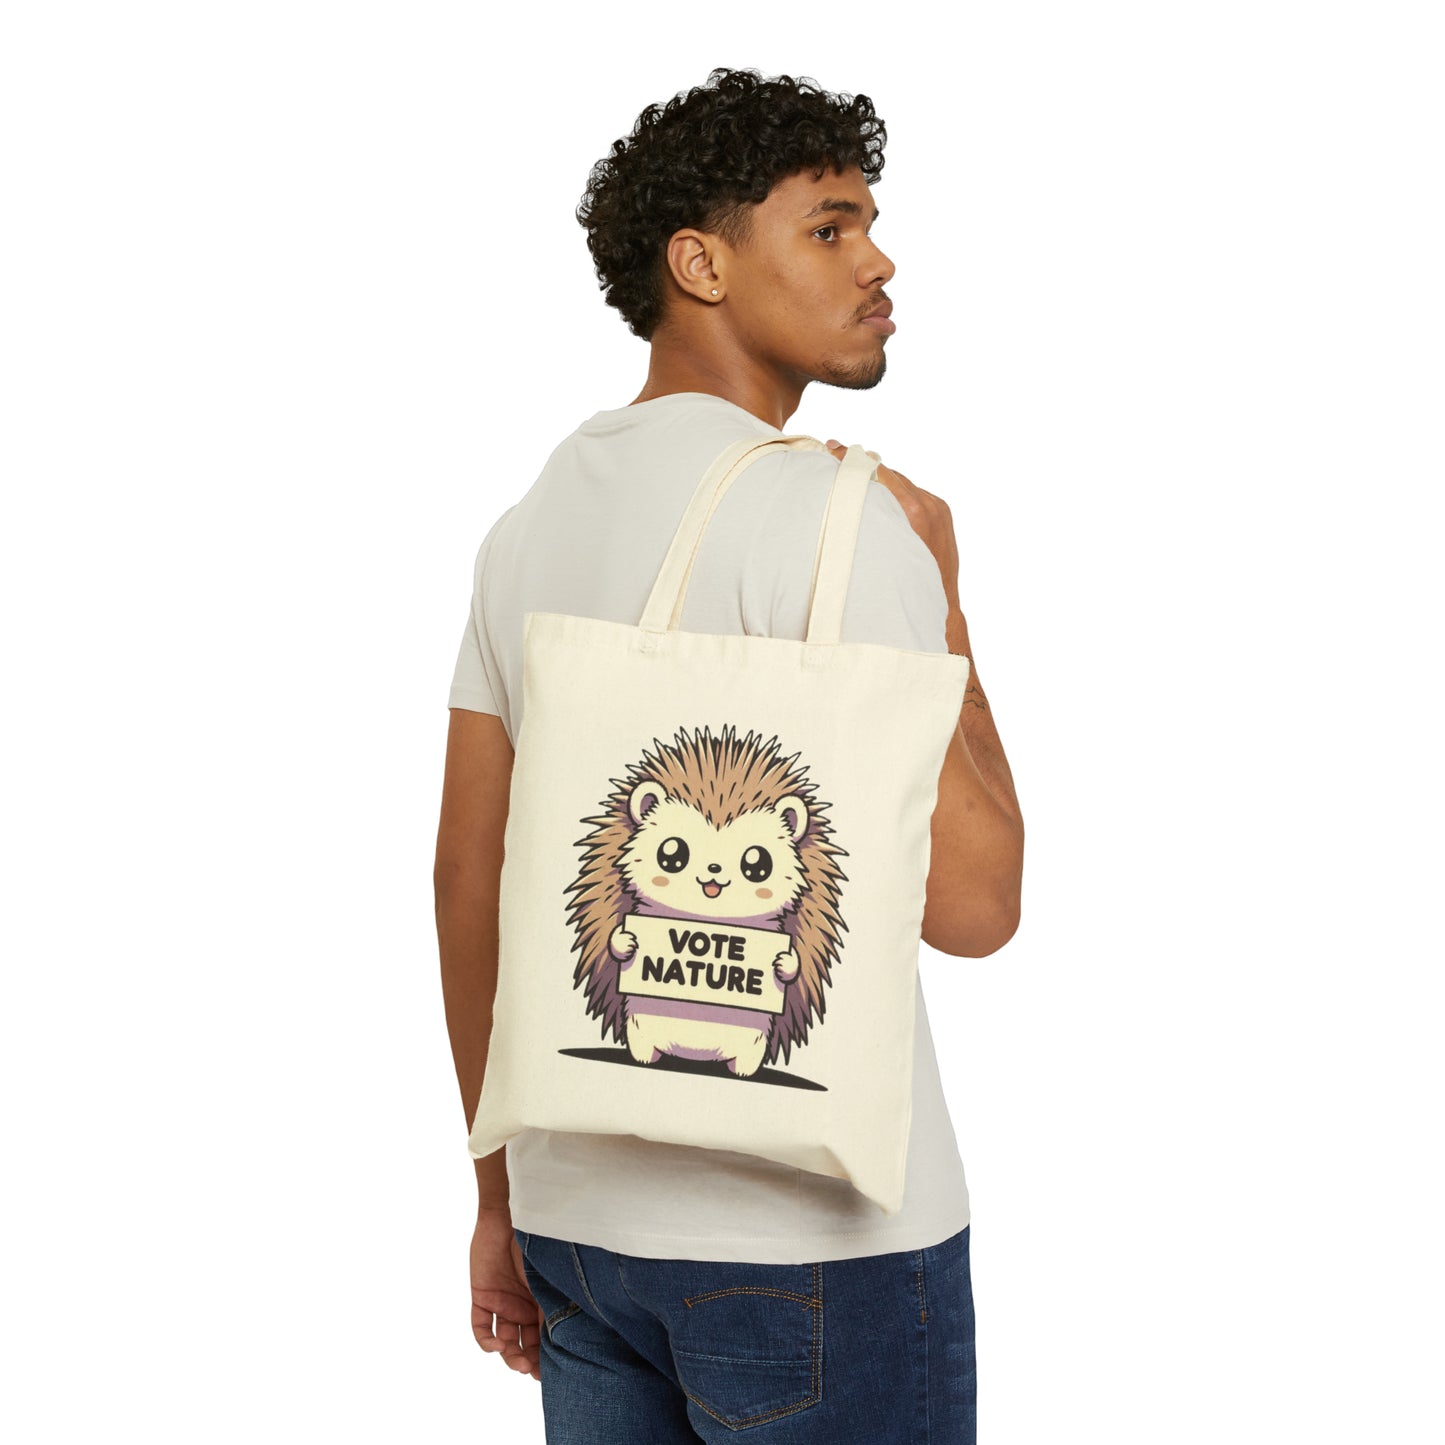 Inspirational Cute Porcupine Statement Cotton Canvas Tote Bag: Vote Nature! & carry a laptop, kindle, phone, notebook, goodies to work/coffee shop